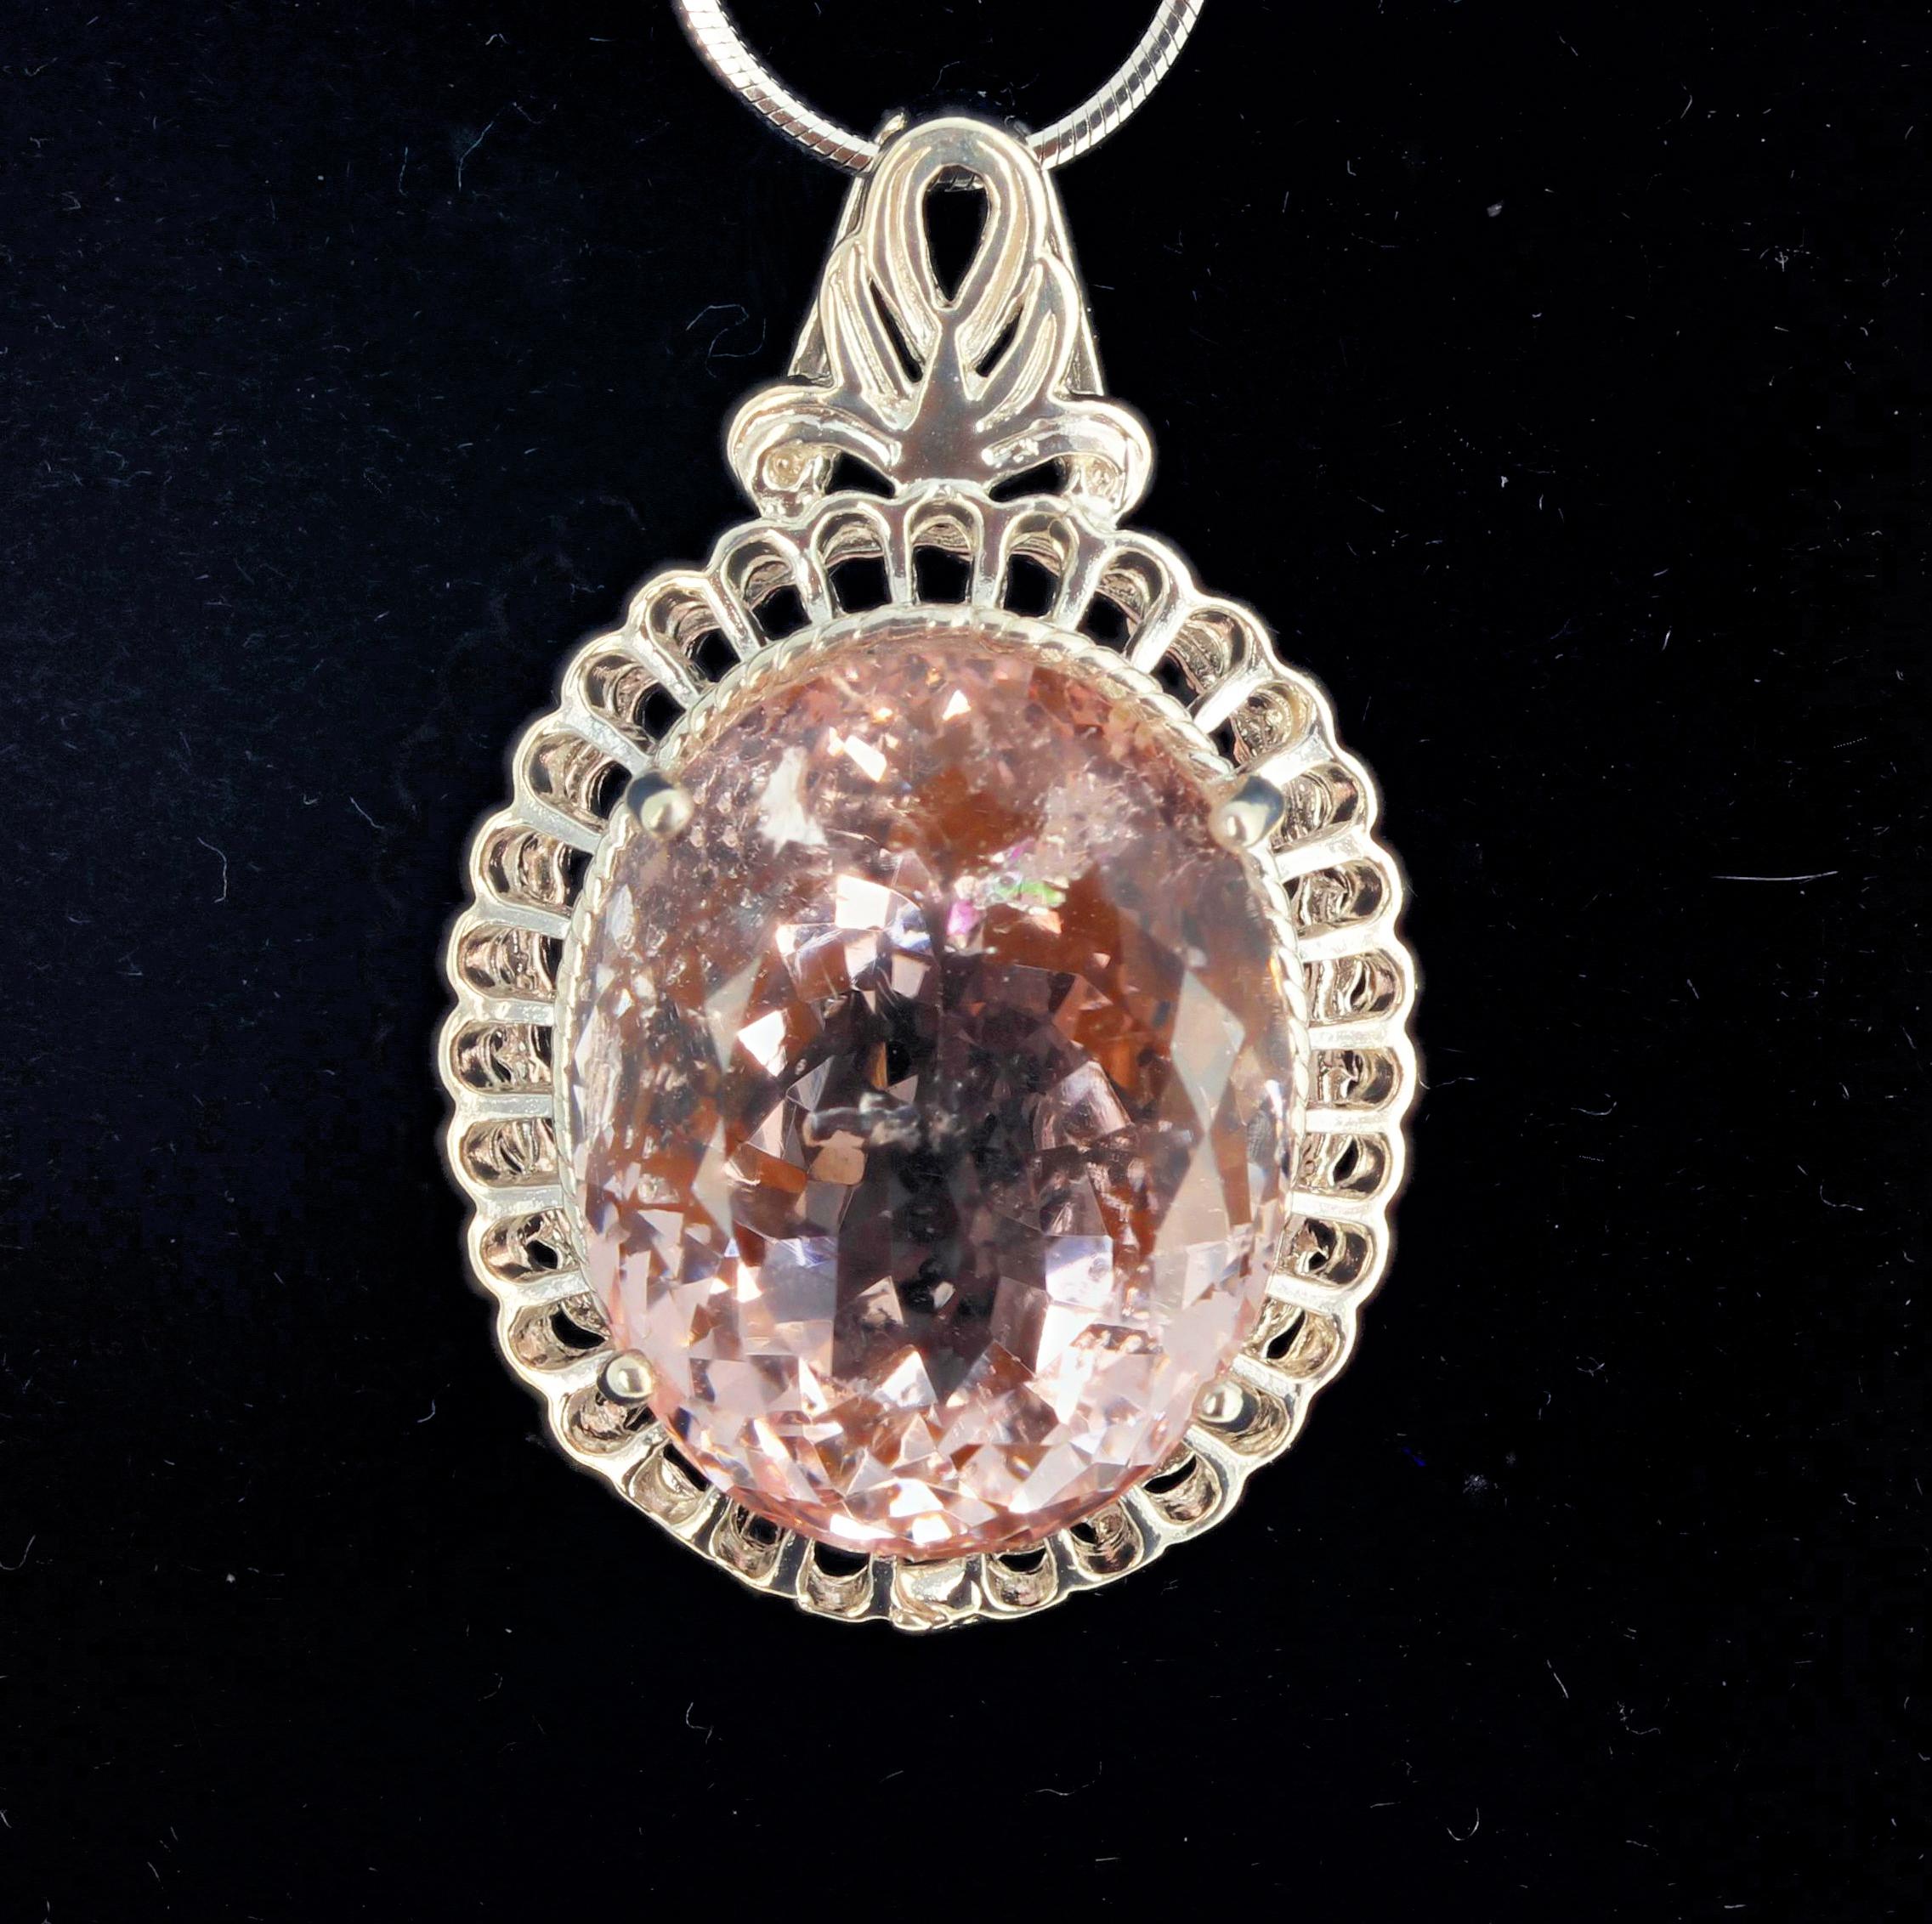 Brilliant rare 29 carat natural Morganite (20 mm x 16 mm) set in a sterling silver handmade pendant.  This hangs approximately 1.7 inches long.  Spectacular optical effect in the Morganite exhibits pinky reflections and fire highlights in spectral